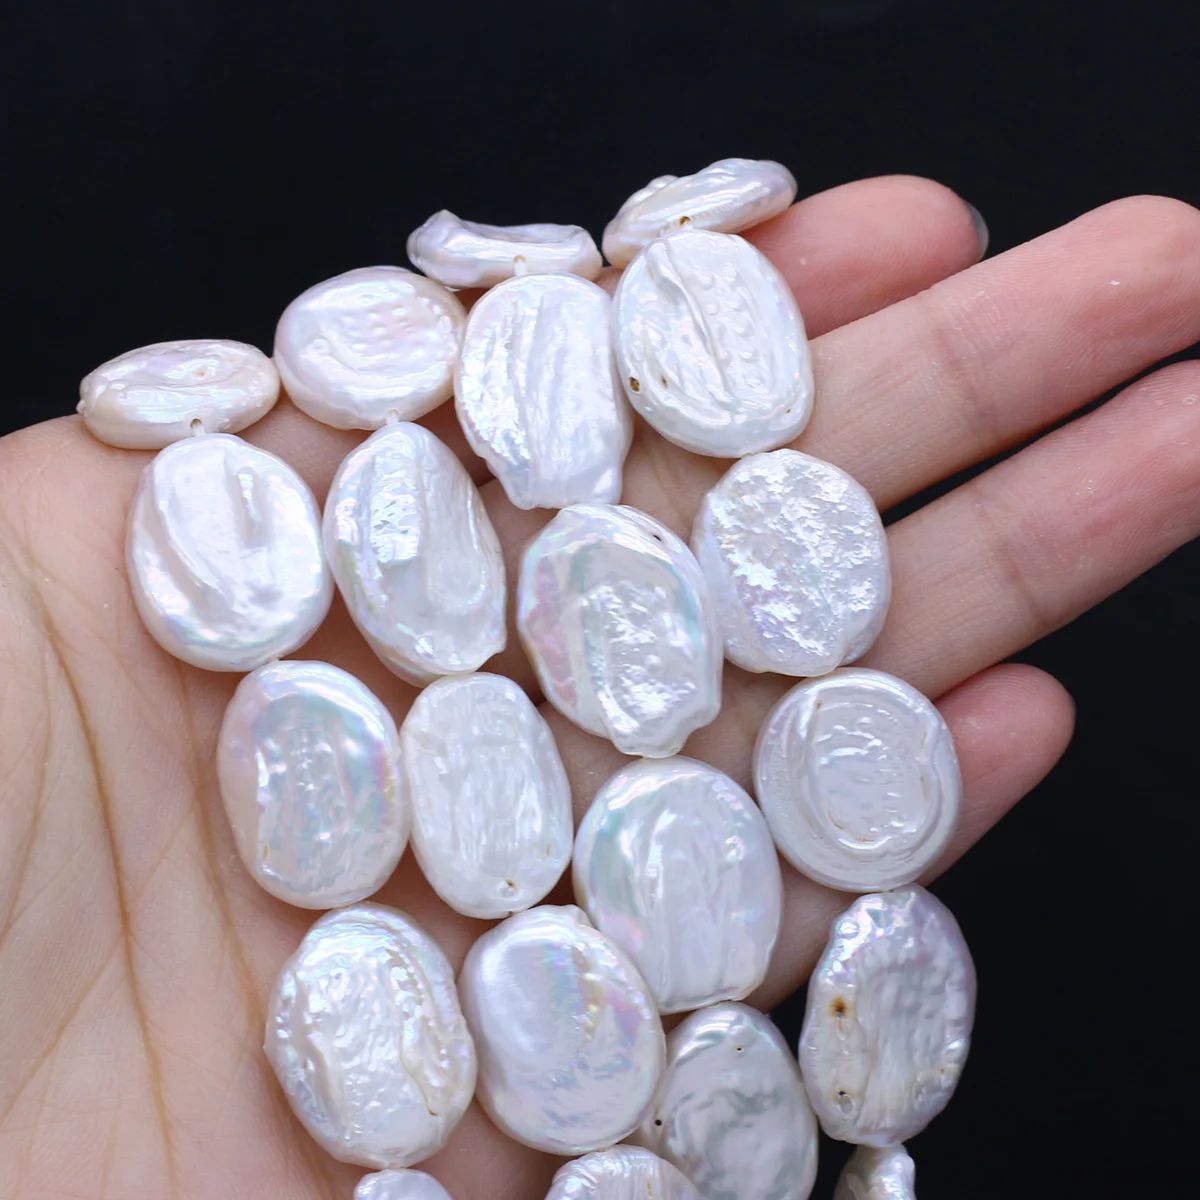 

Natural White Baroque Pearl Slice Beads Oval Shape Loose Hole Bead for Jewelry Making Diy Women Trendy Necklace Bracelet Gifts